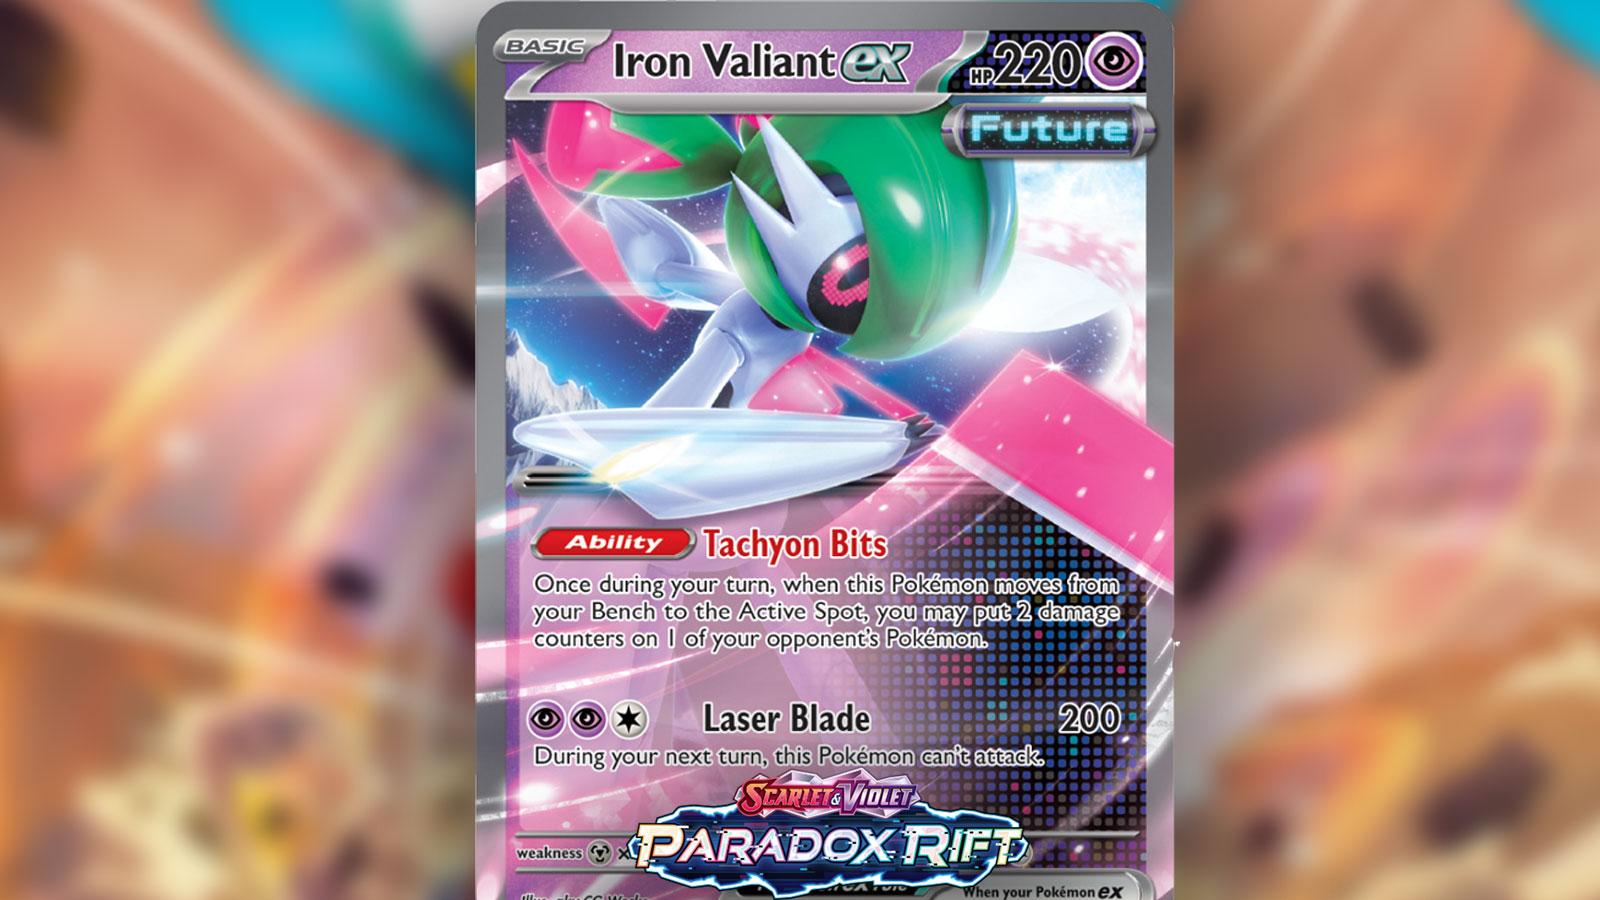 Paradox Rift Battle Pass launches next week in Pokémon Trading Card Game  Live - Log-in any time once it goes live to receive free Roaring Moon ex  deck : Bulbagarden